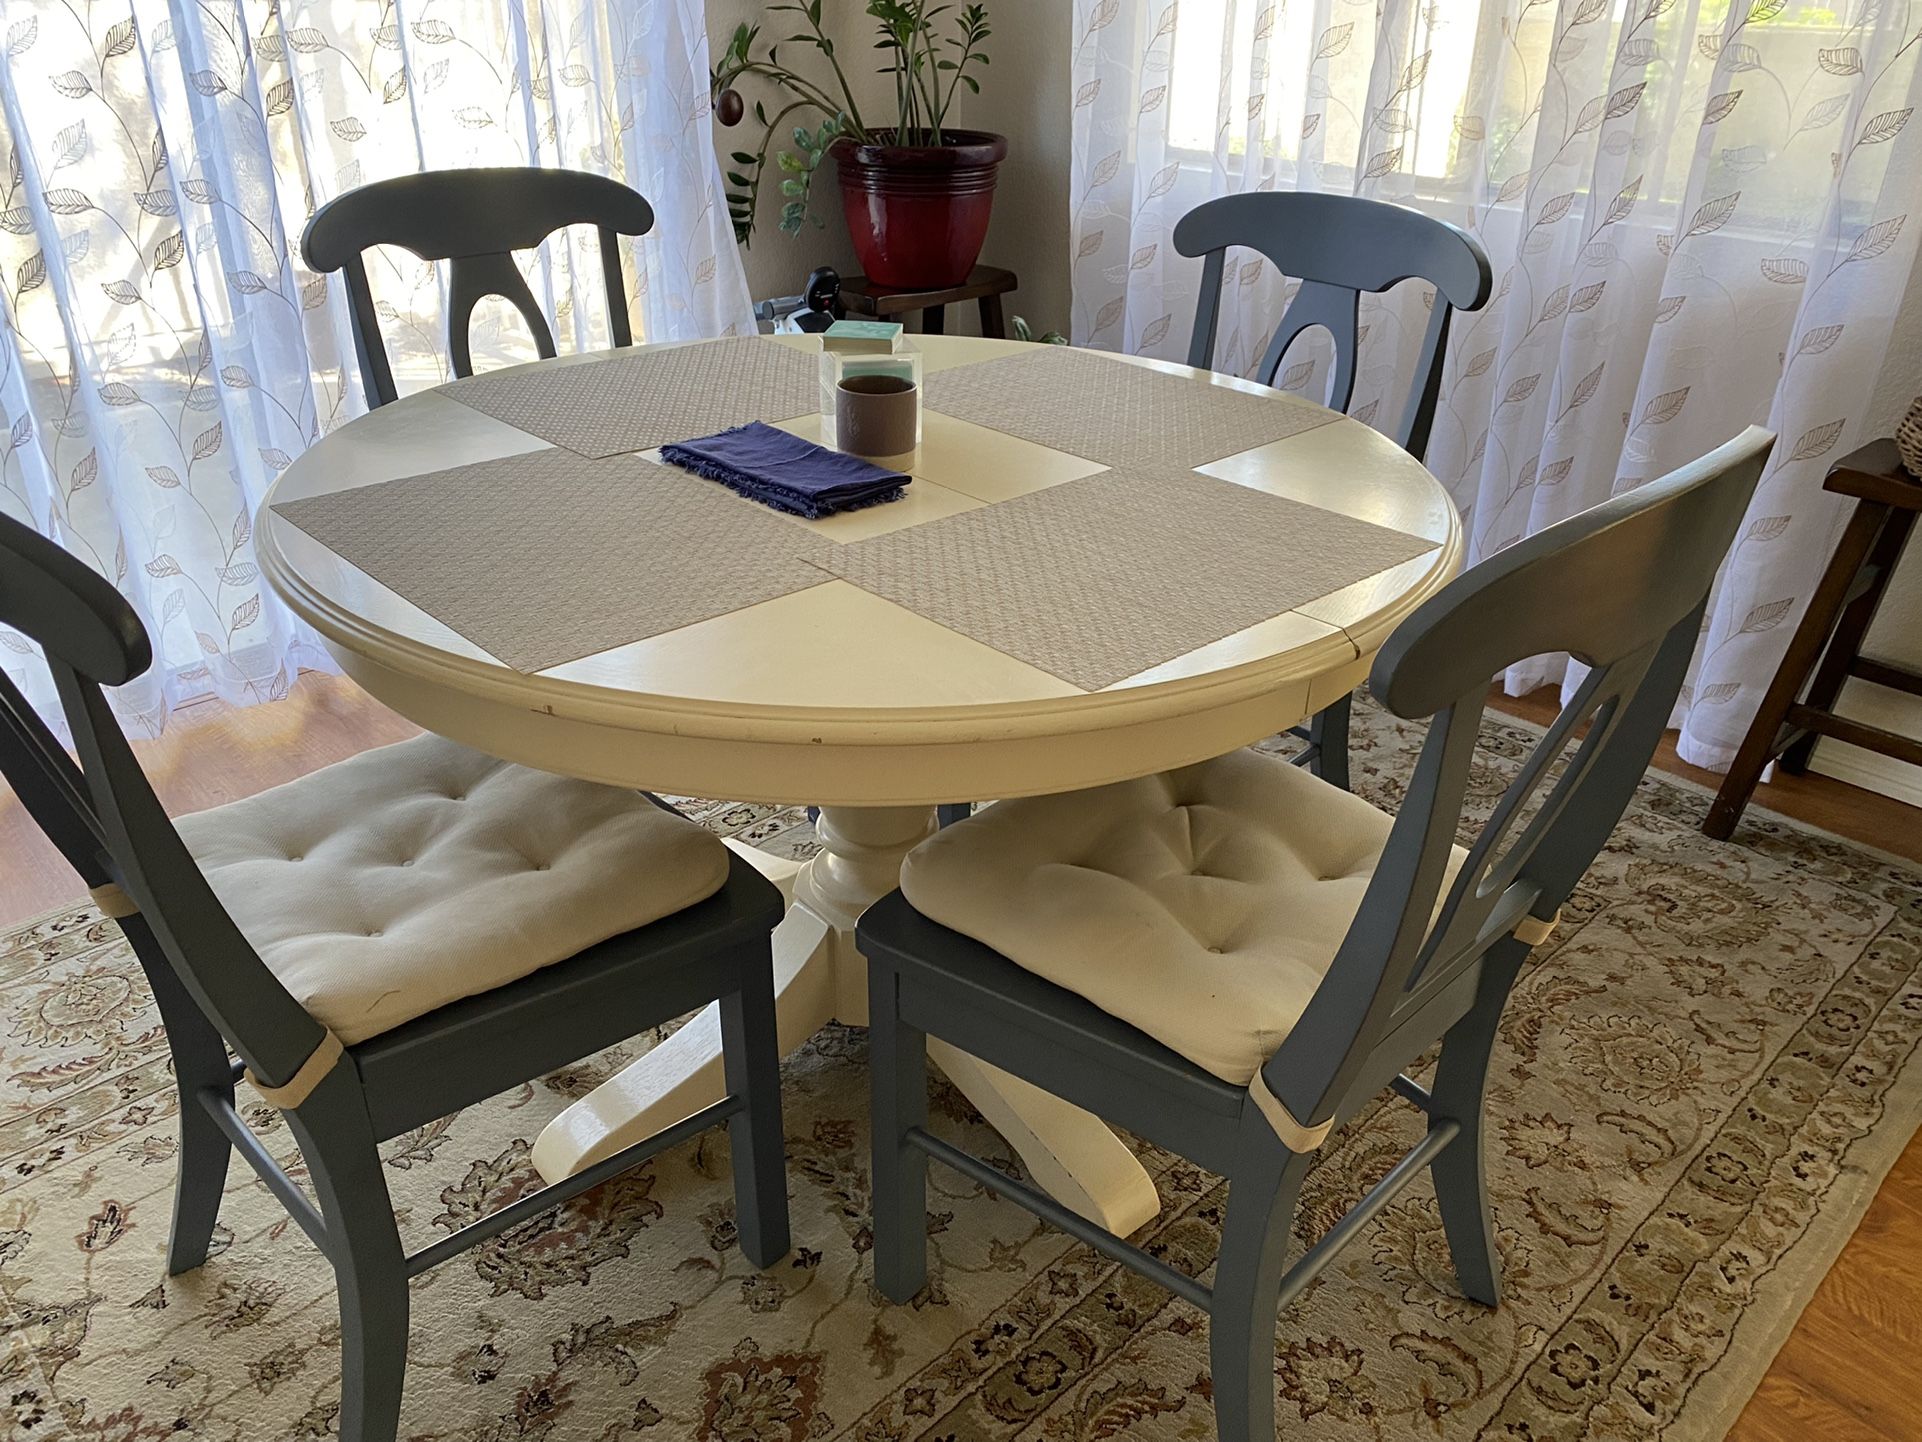 Dining / Kitchen Table and 4 chairs